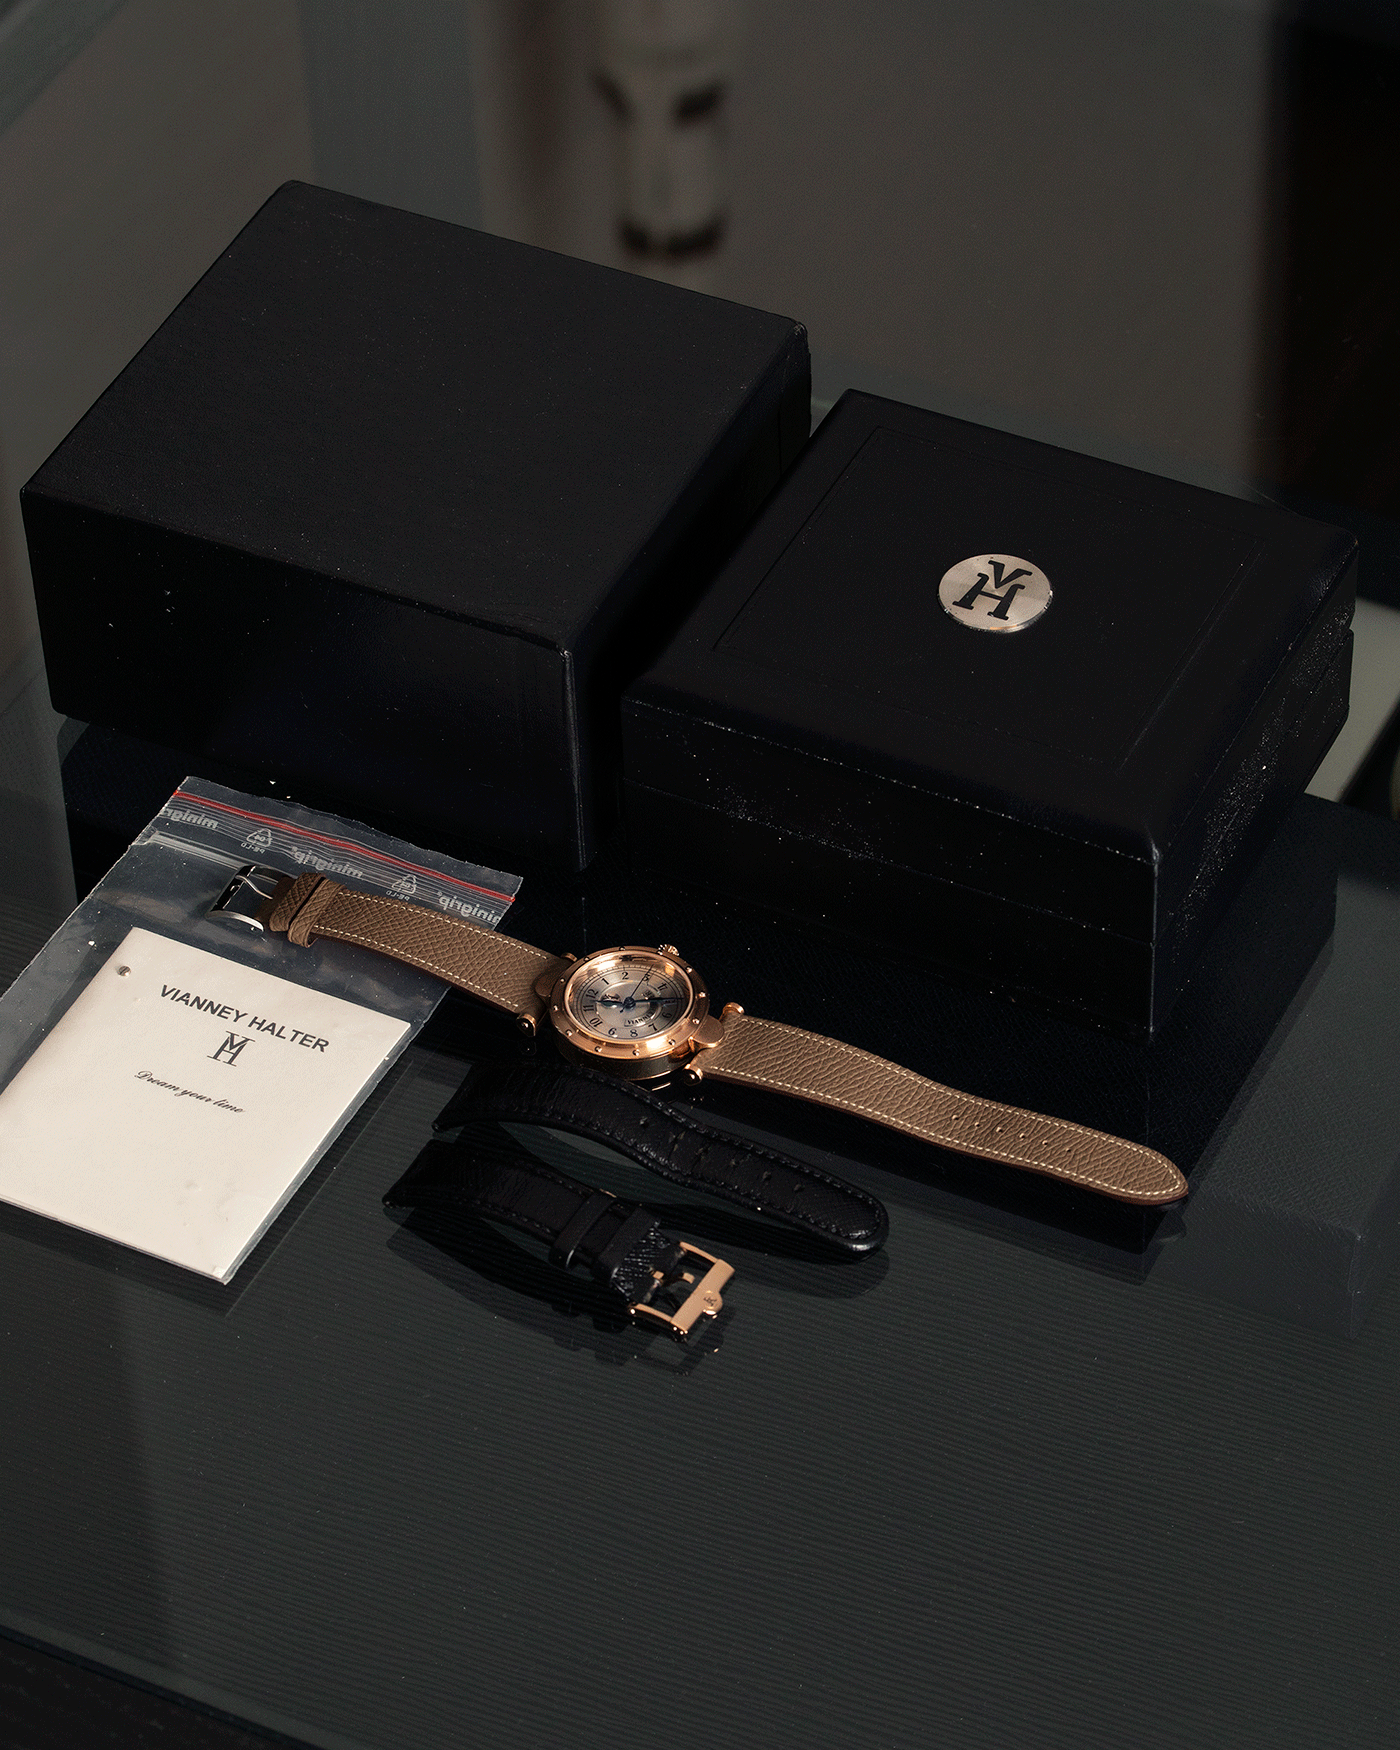 Brand: Vianney Halter Year: 2000’s Model: Classic Material: 18k Rose Movement: Modified Lemania 8810 with mystery motor Case Diameter: 36mm Bracelet/Strap: Vianney Halter Black Alligator with matching Yellow Gold Buckle